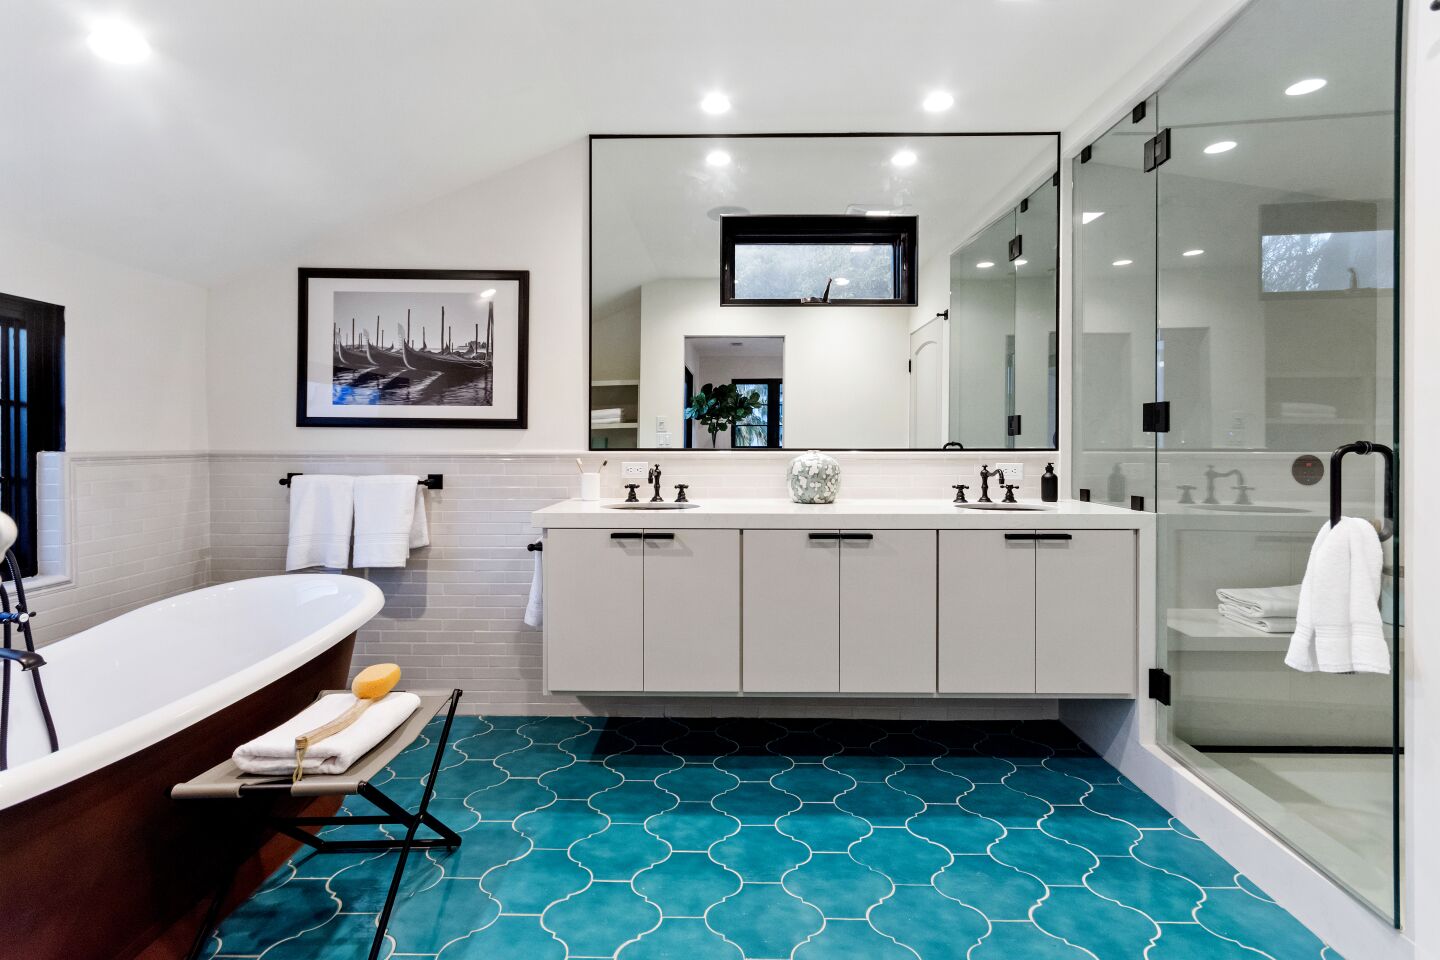 A freestanding tub and bright tile accent a bathroom.